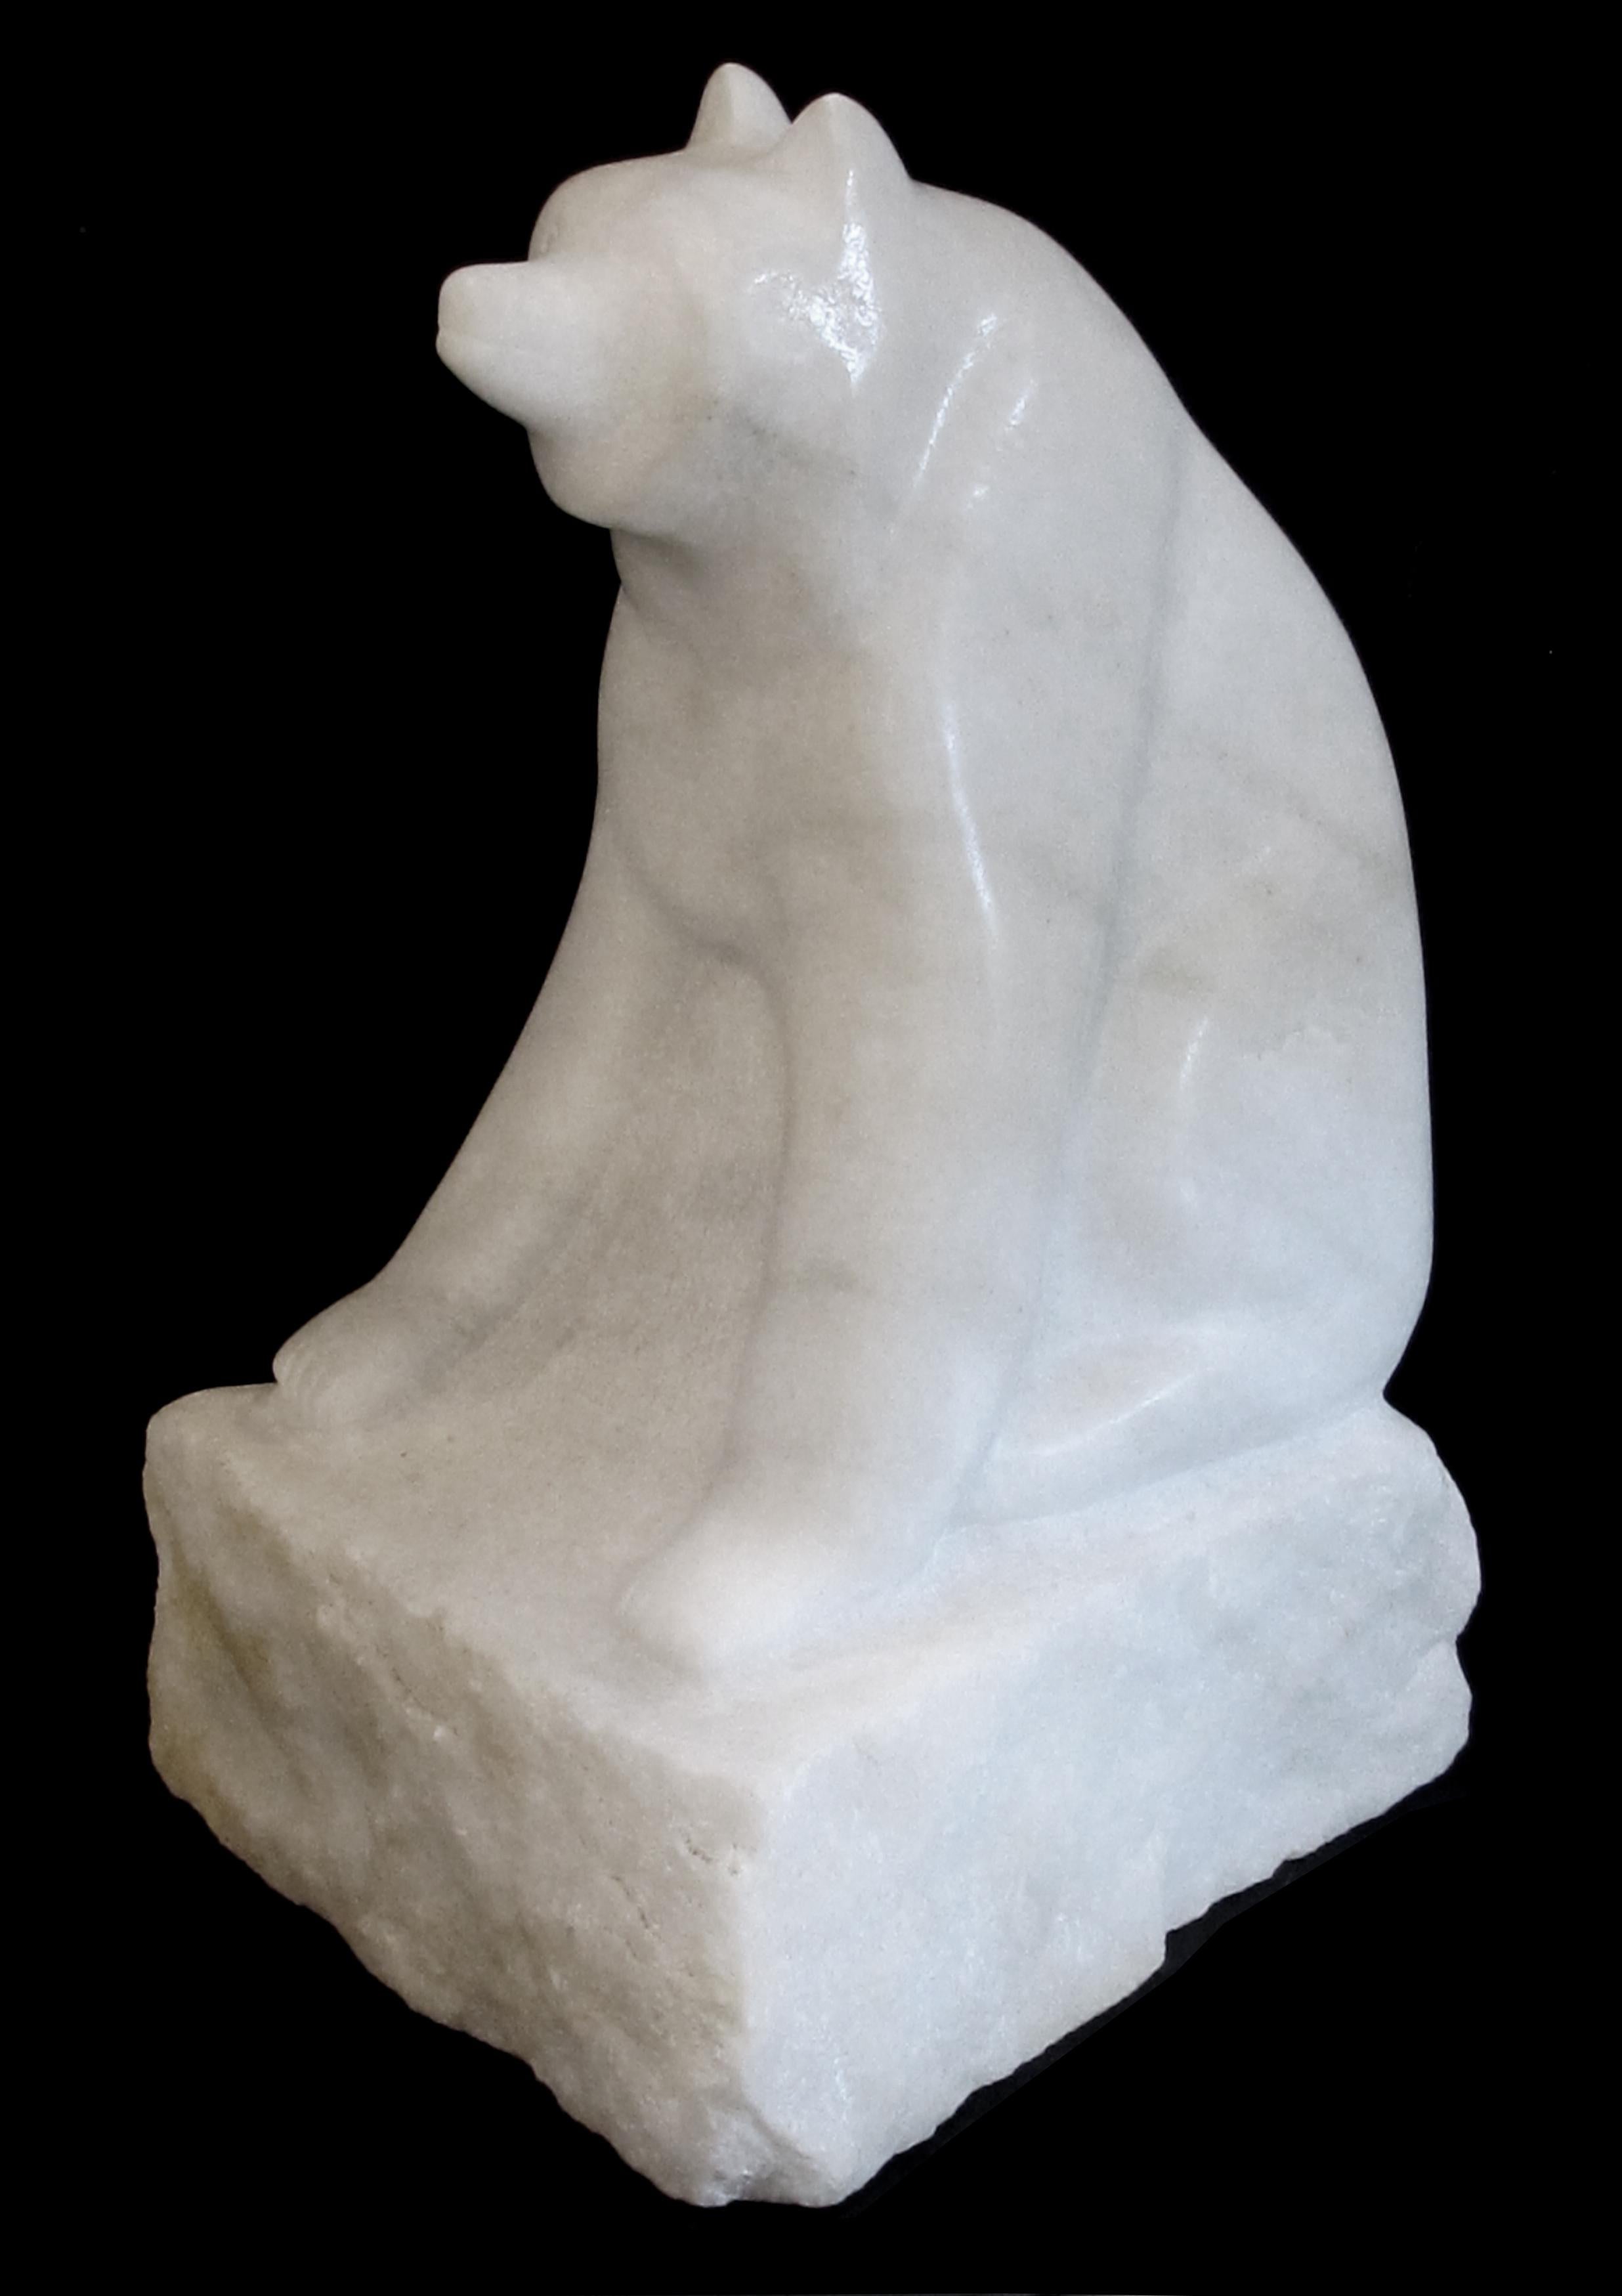 A large-scaled and expressive carved marble figure of a seated red panda bear with its distinctive puffy tail; the firmly seated bear with direct gaze resting on a square base; the red panda is considered to be a 'good luck charm' and brings good